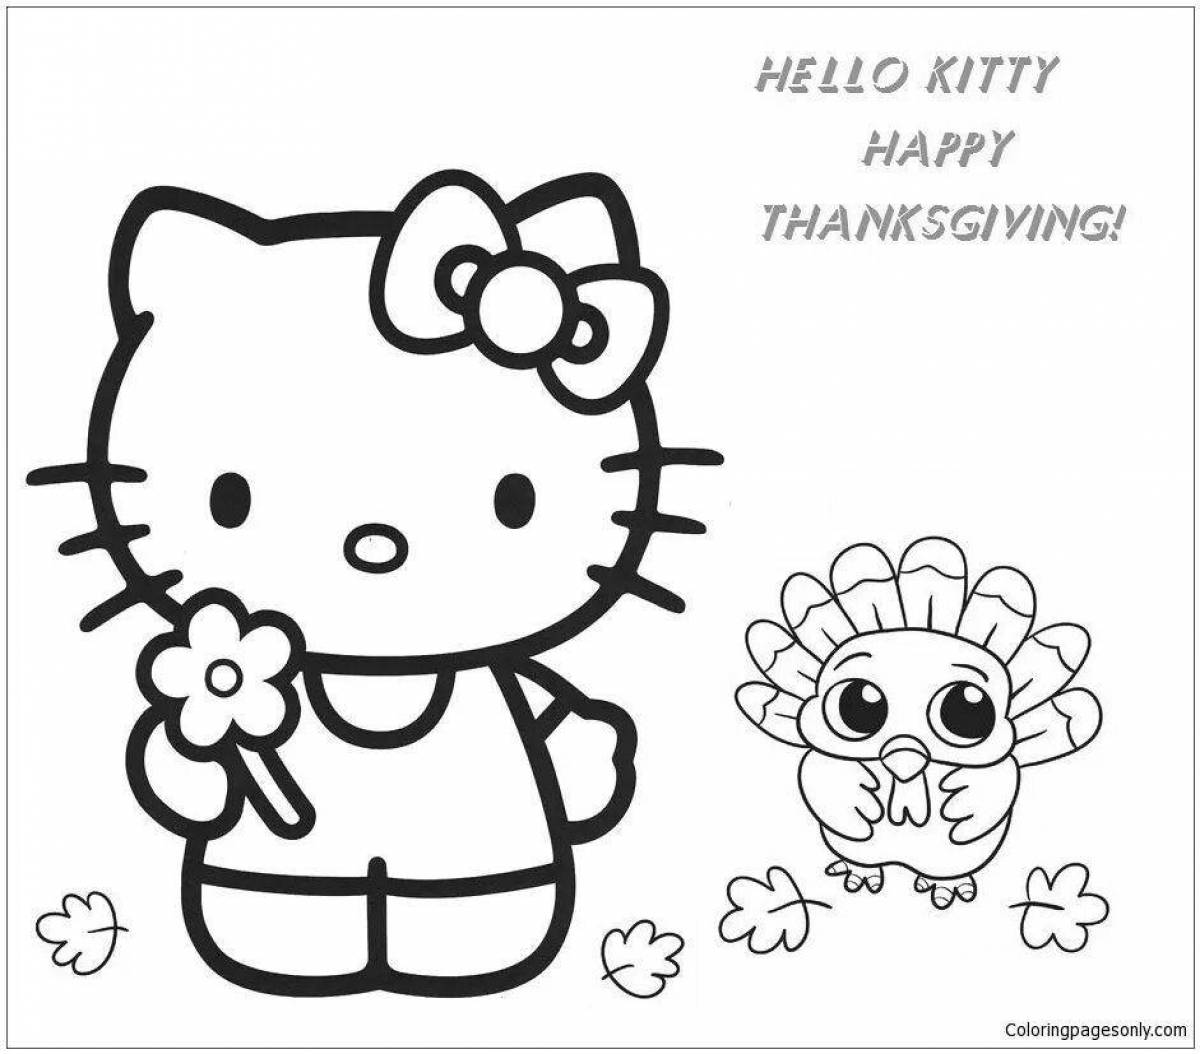 Bright hello kitty face coloring page